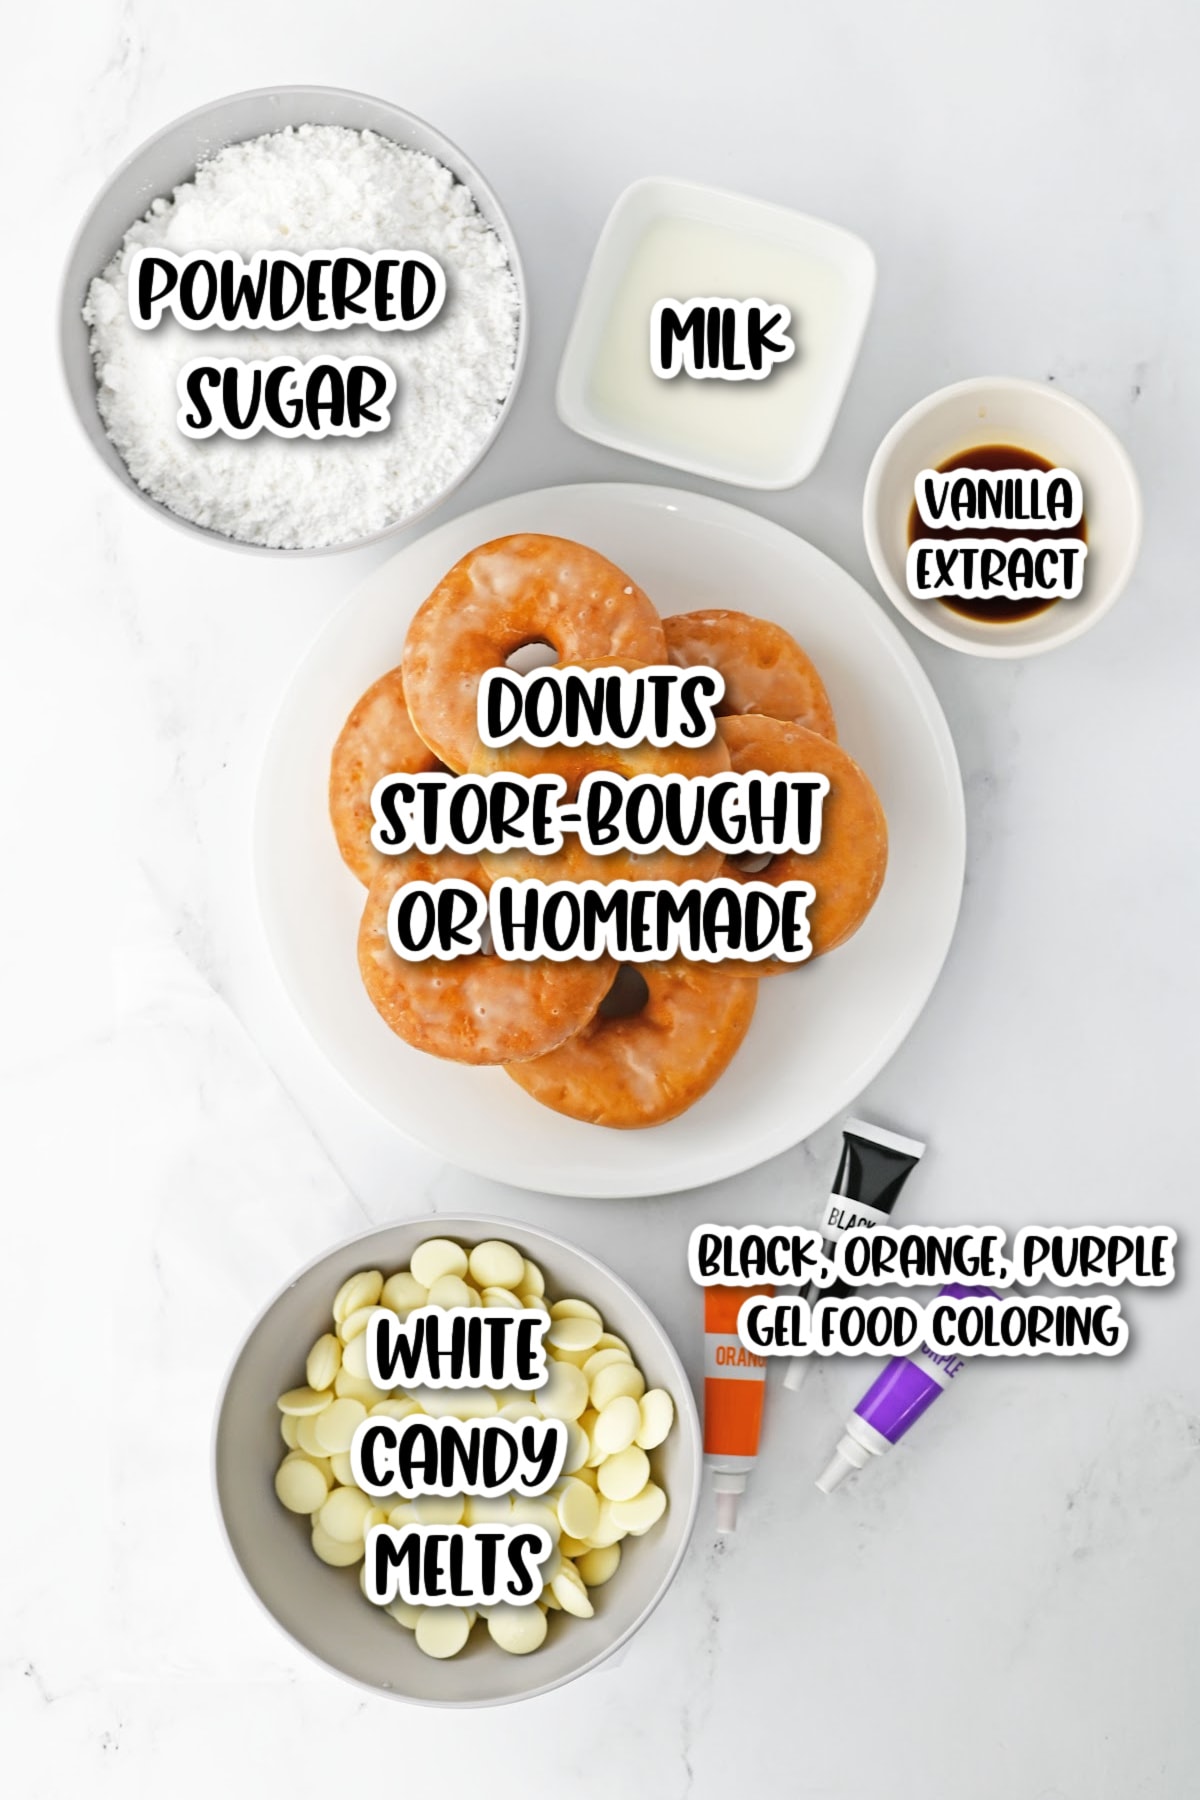 Ingredients for Halloween donuts